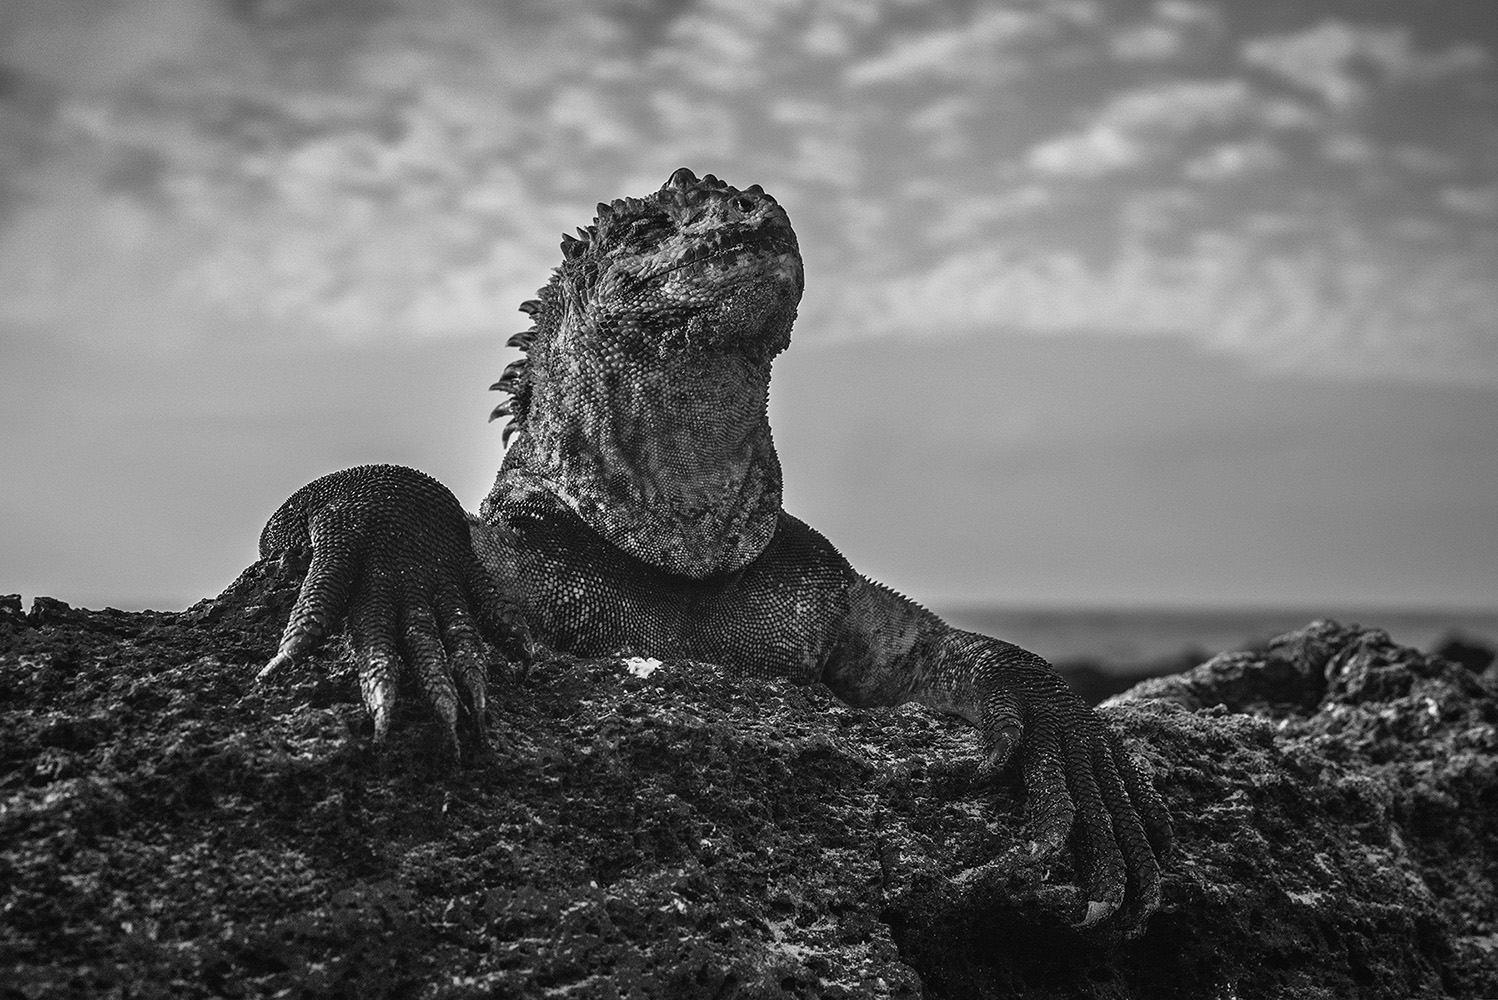 Marine iguana, Isabela Island, unique animal of the Galapagos Islands. The marine iguana (Amblyrhynchus cristatus) is an iguana found only on the Galápagos Islands. It feeds on algae and can dive over 9 meters into the water. They are the world‘s only sea-going lizards and must warm its body in the sun after swimming in cold ocean waters, because reptiles do not have the ability to thermoregulate. The average lenght of an adult male is 1.3 meters and the weight up to 13kg.